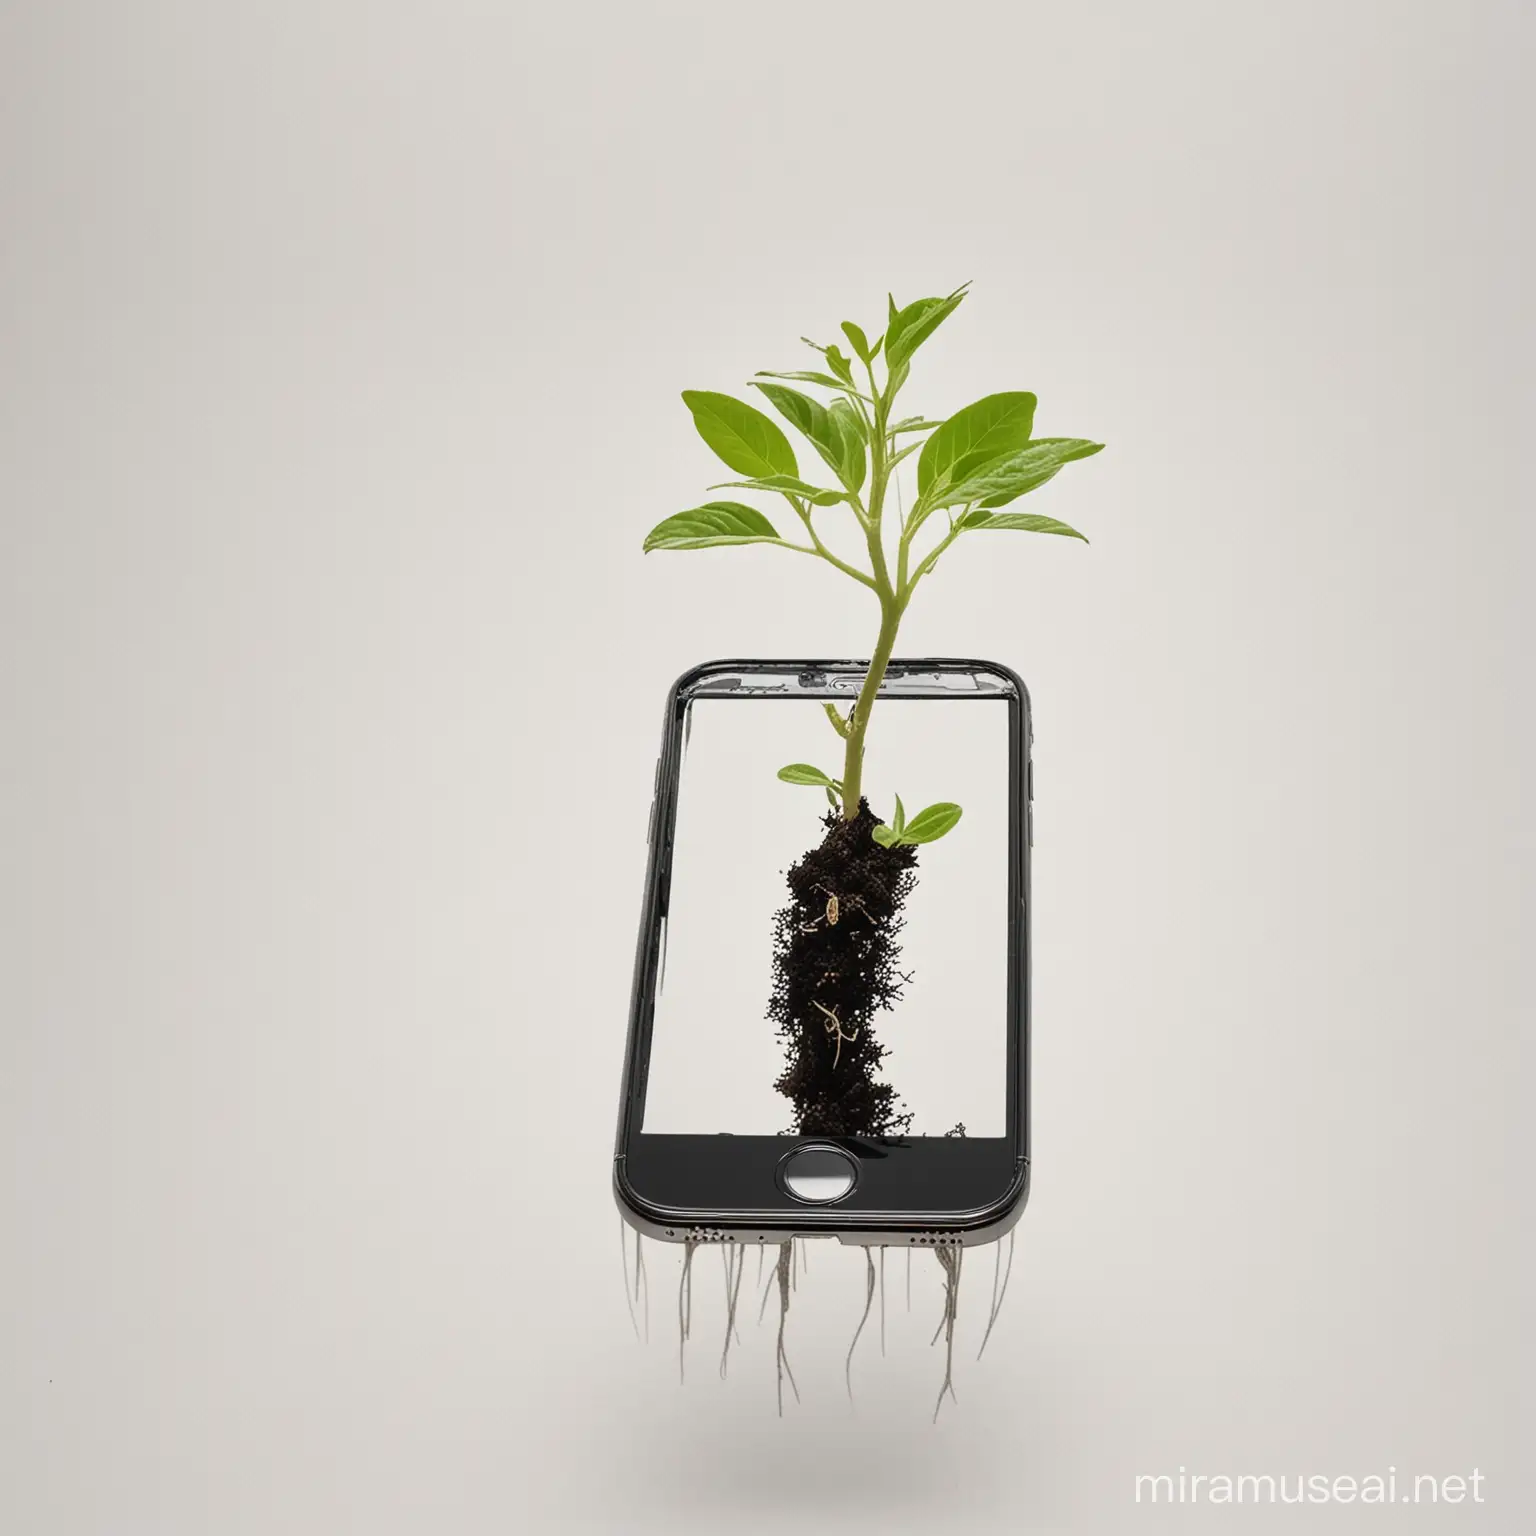 A plant sprouted out of iPhone on a white background
